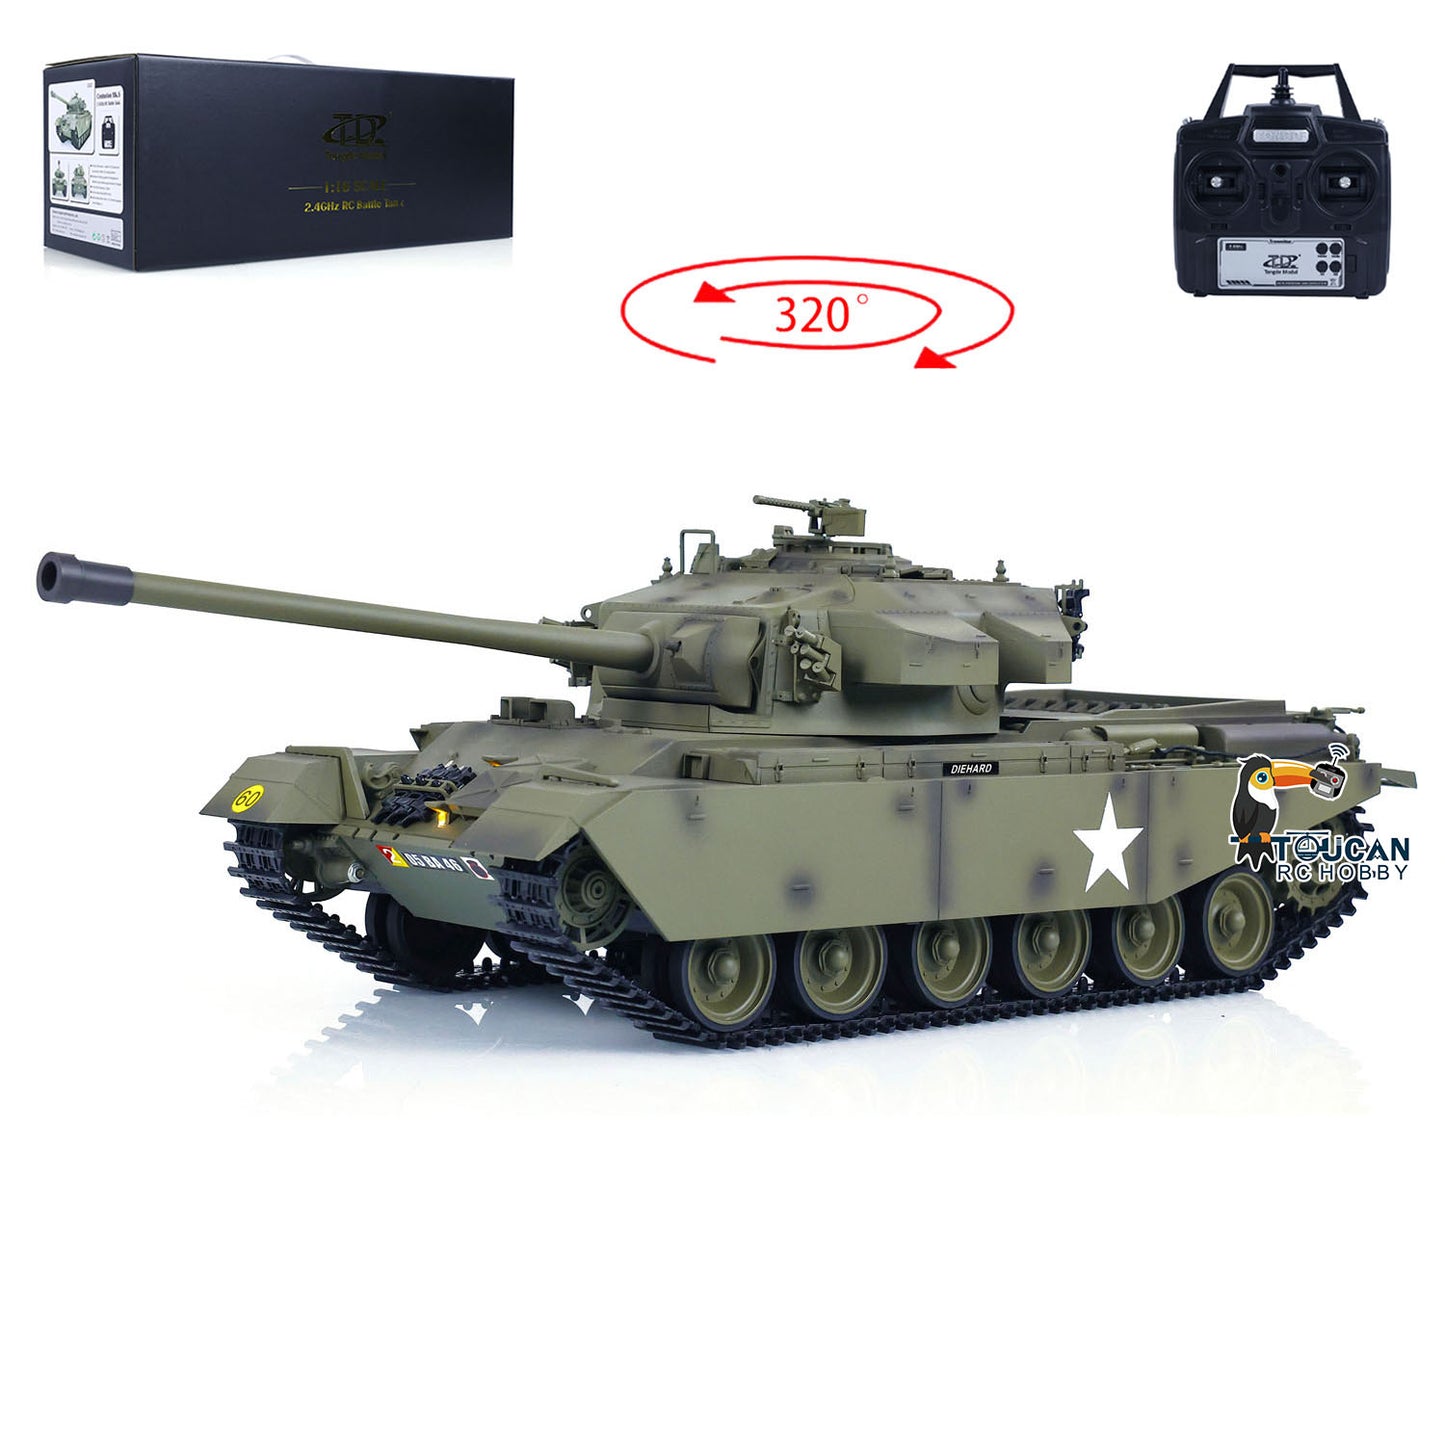 IN STOCK Tongde 1/16 RC Infrared Battle Tank Remote Controlled Panzer Centurion MK5 Electric Tanks Combat System Painted Assembled Model